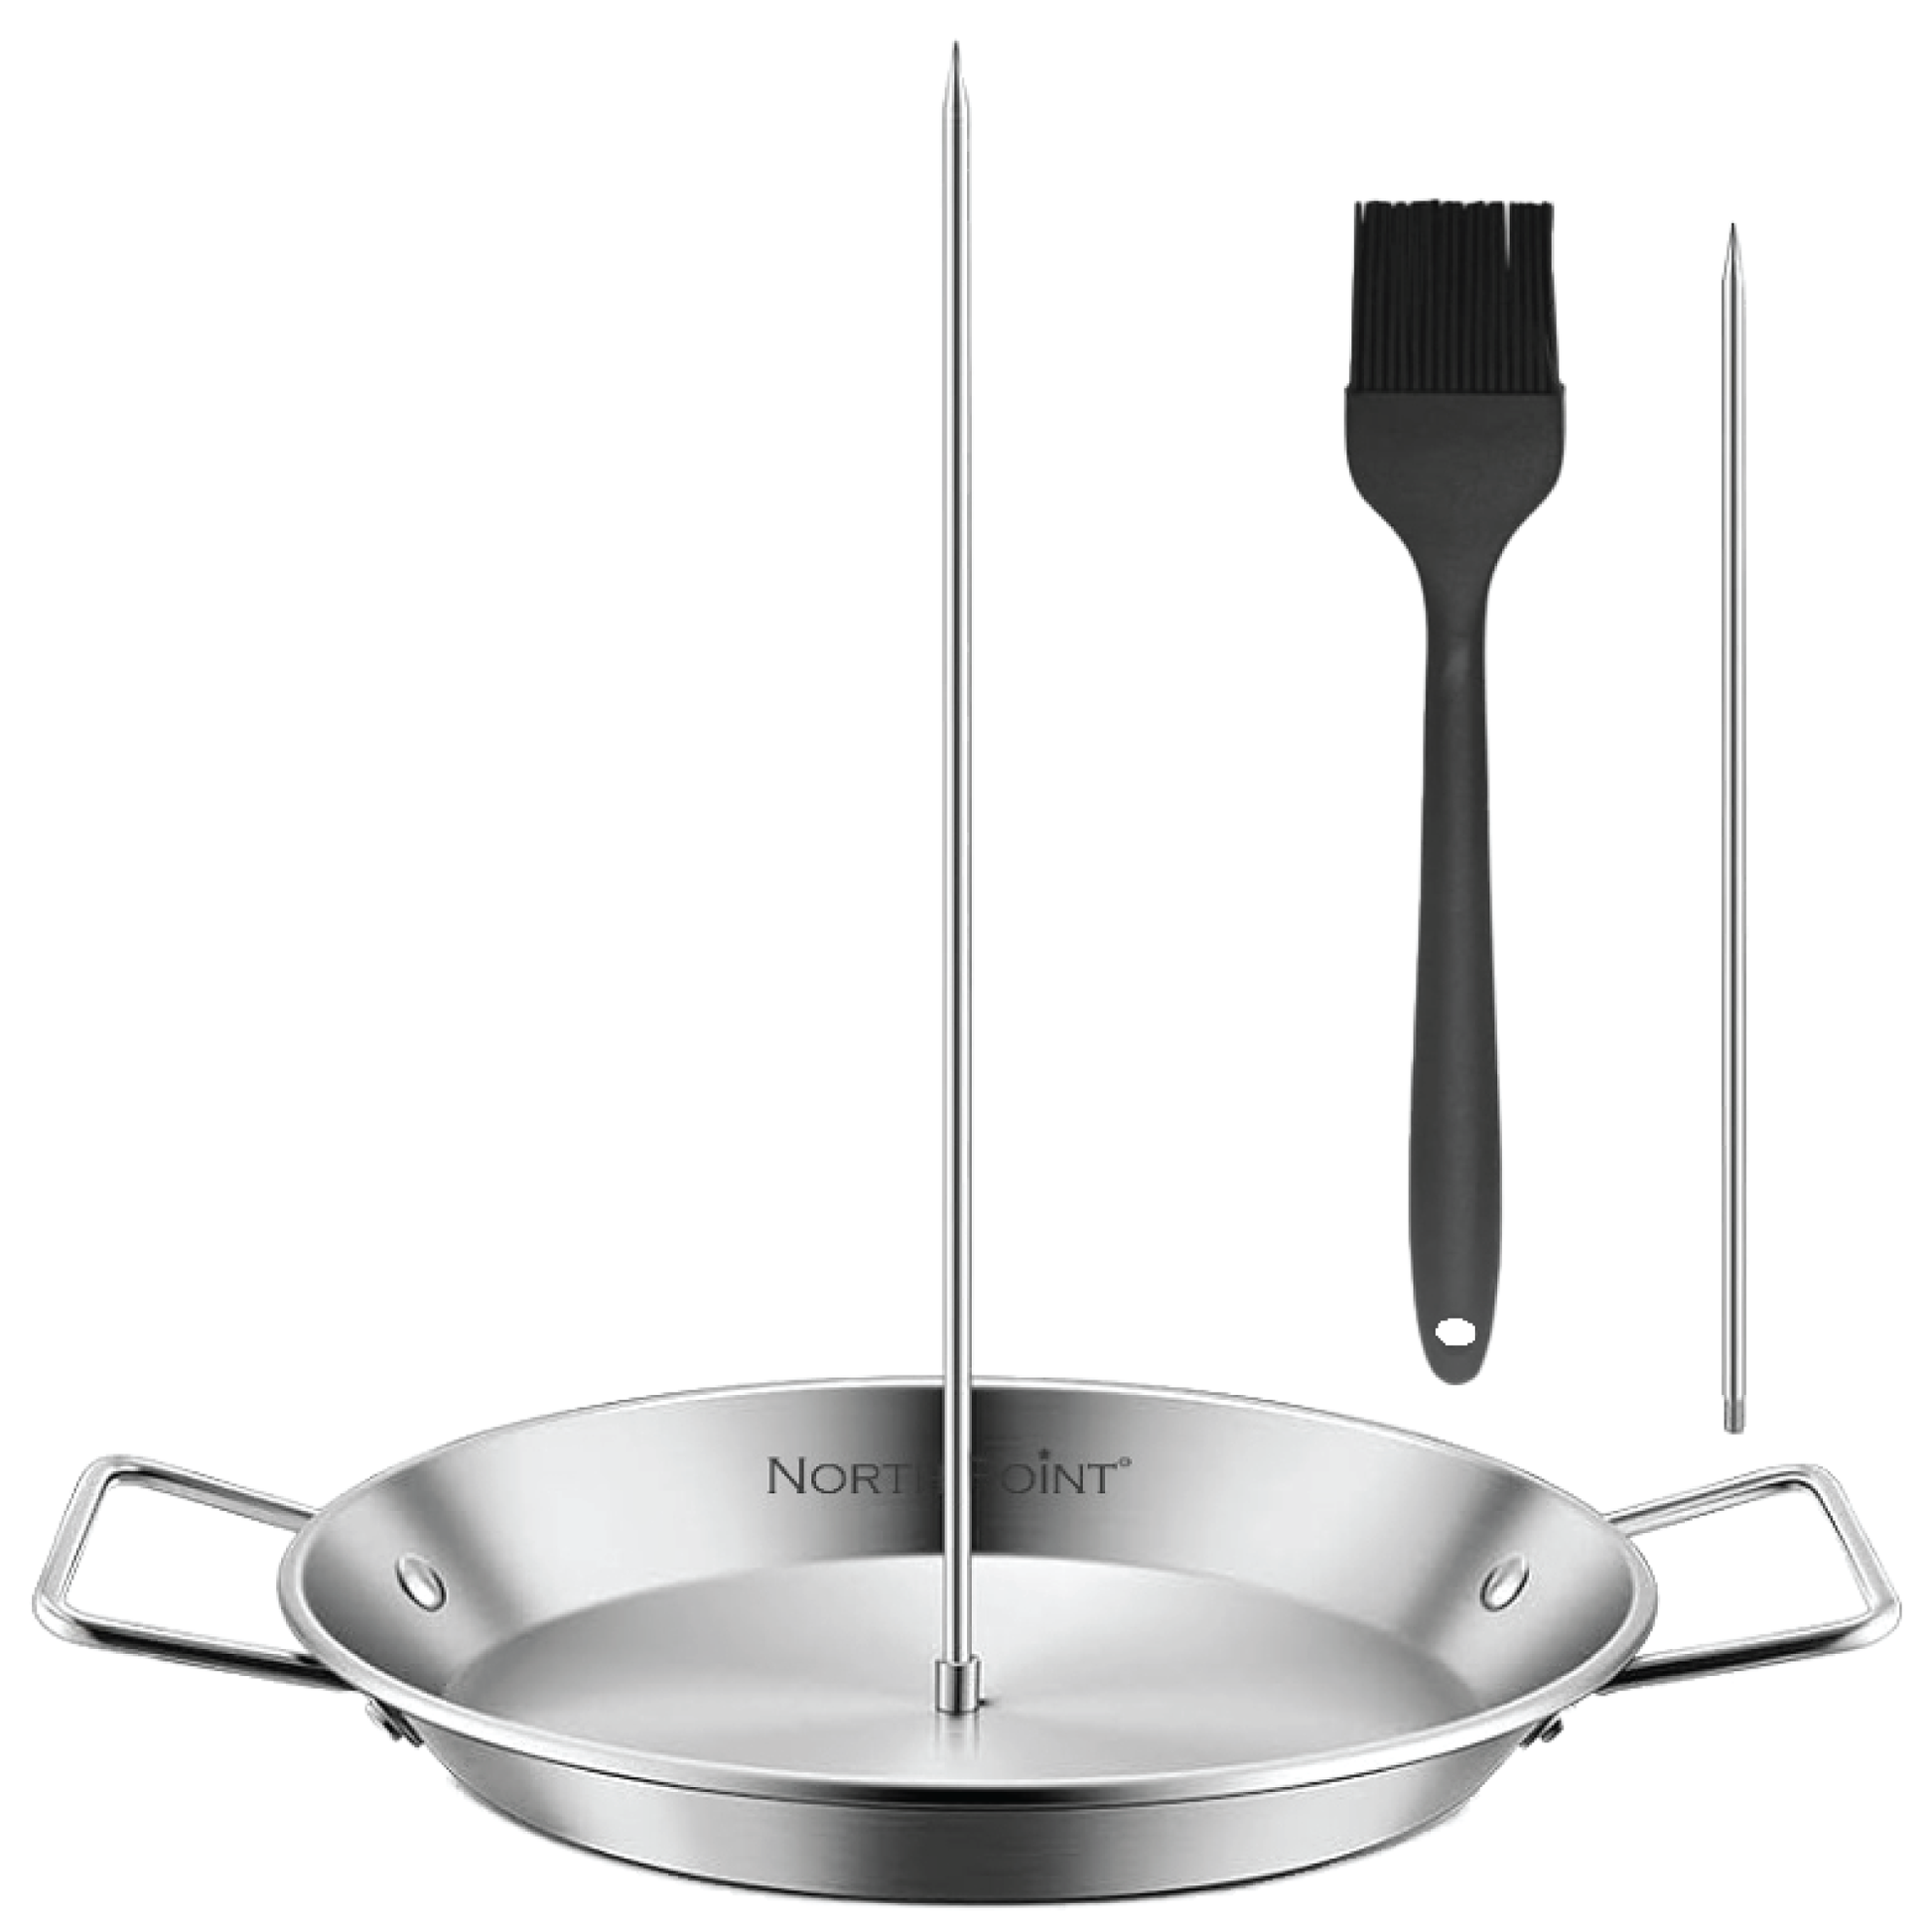 A stainless steel grill pan with 2 skewers and 1 black basting brush, part of the North Point® 4 Piece Skewer Grill Topper Set.